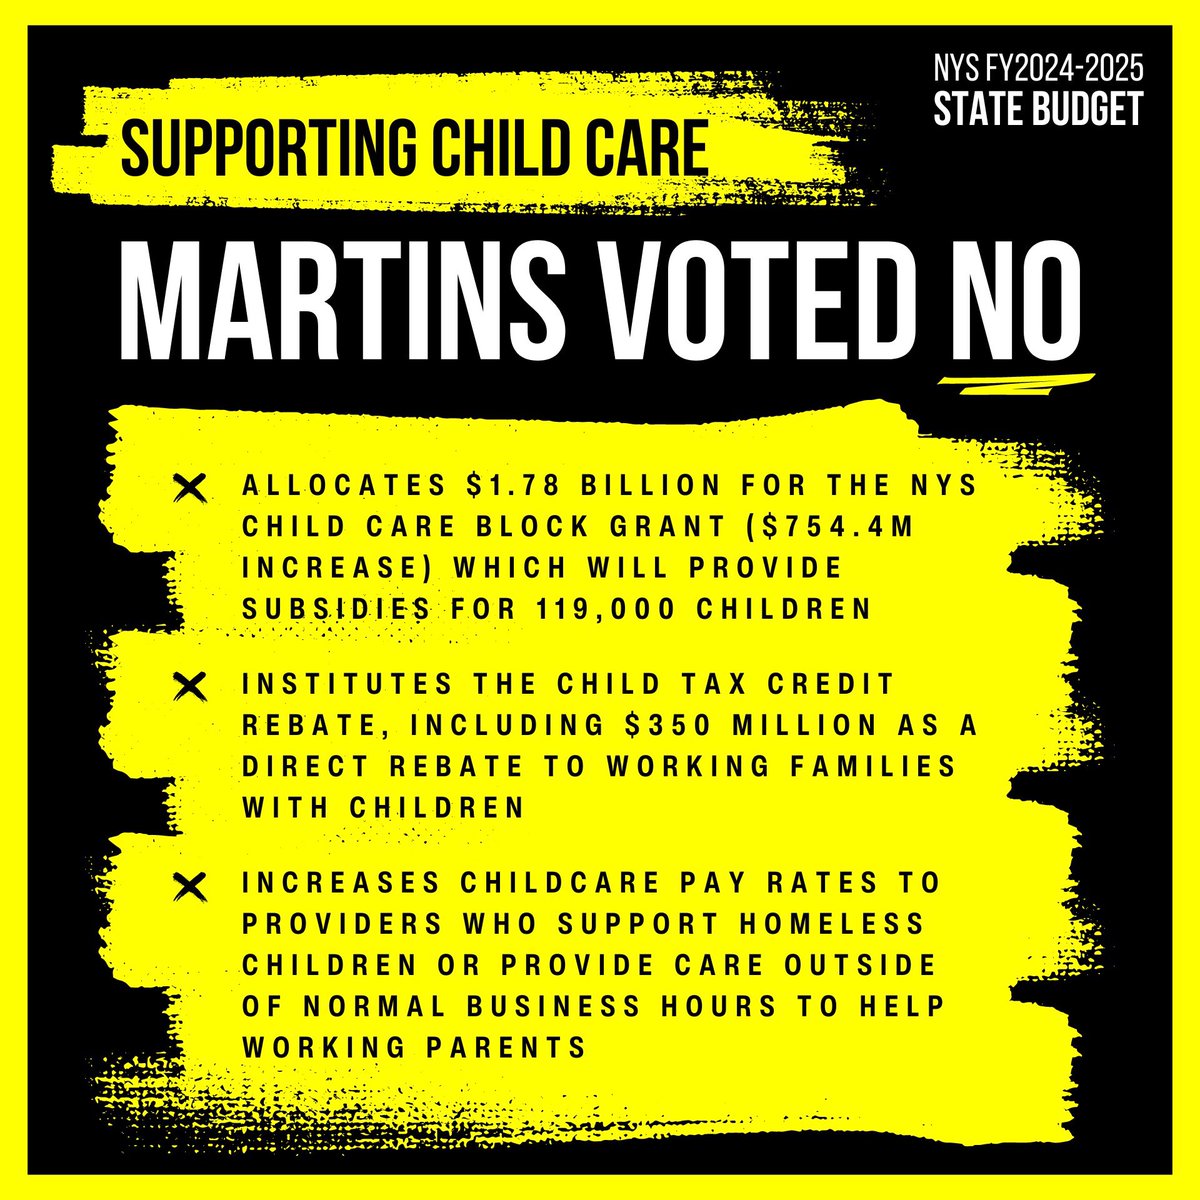 With childcare costs on the rise, we need to be doing everything in our power to give working families the resources they need to provide for their kids. @jackmartinsny clearly just doesn’t get it.